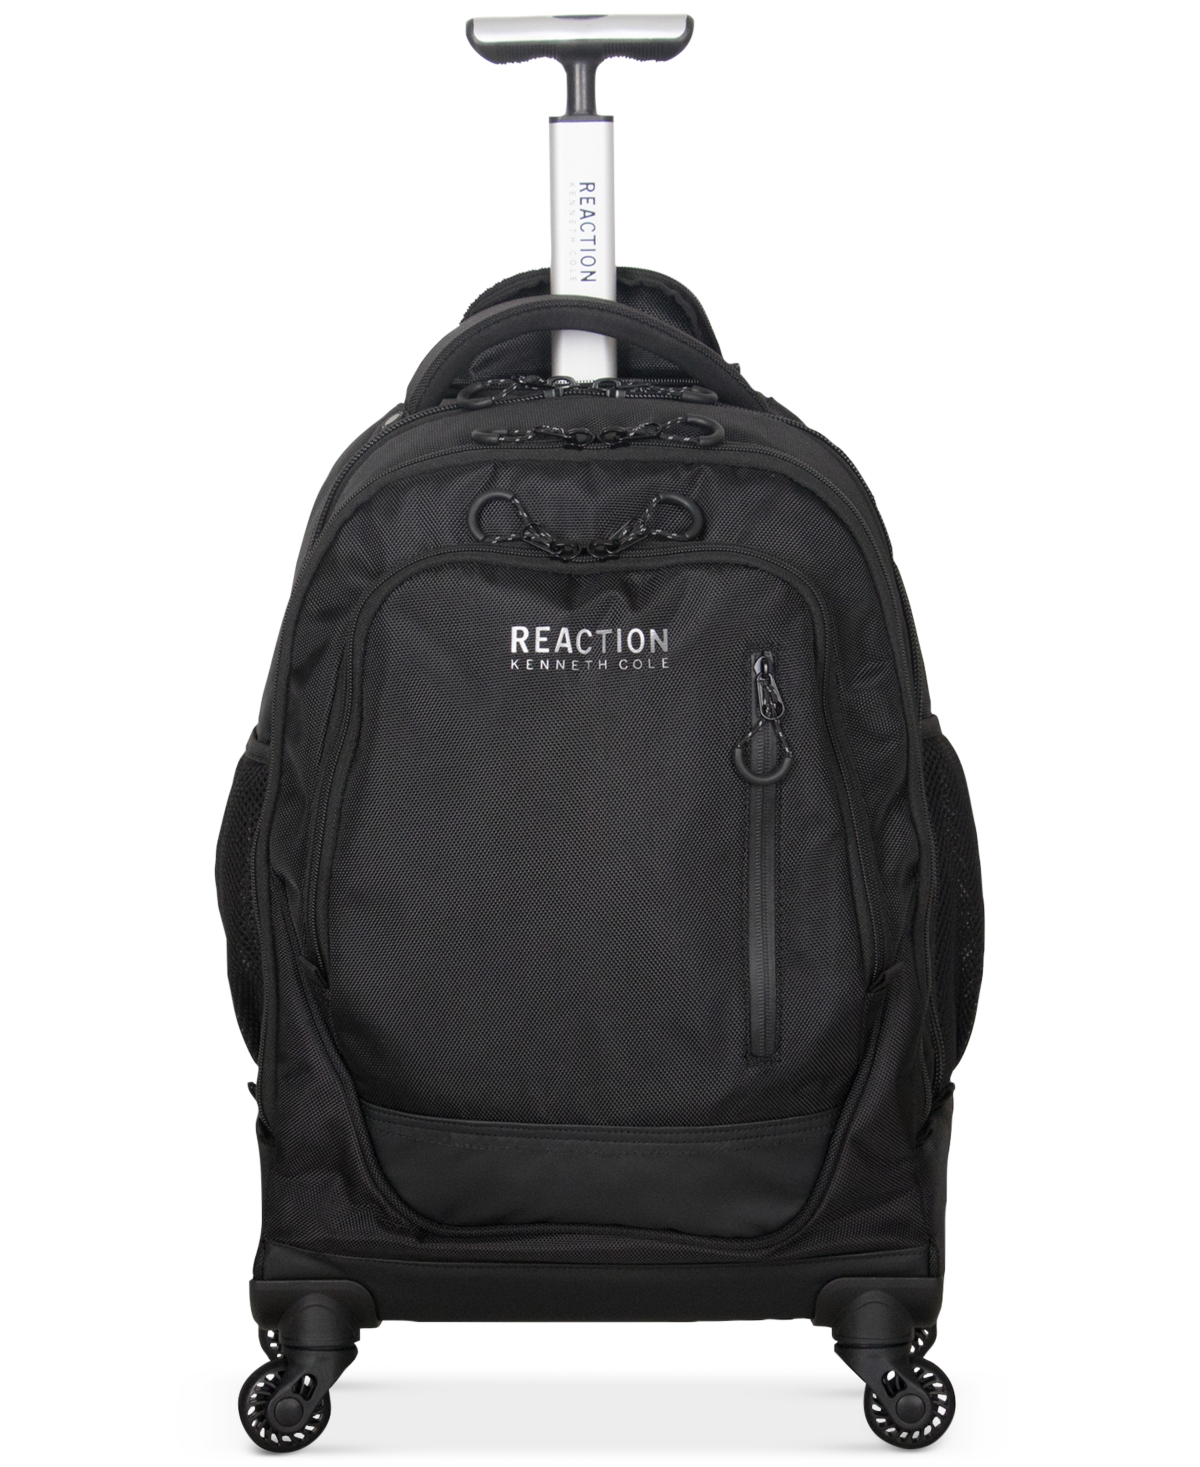 Dual Compartment 4-Wheel 17" Laptop Backpack - Black